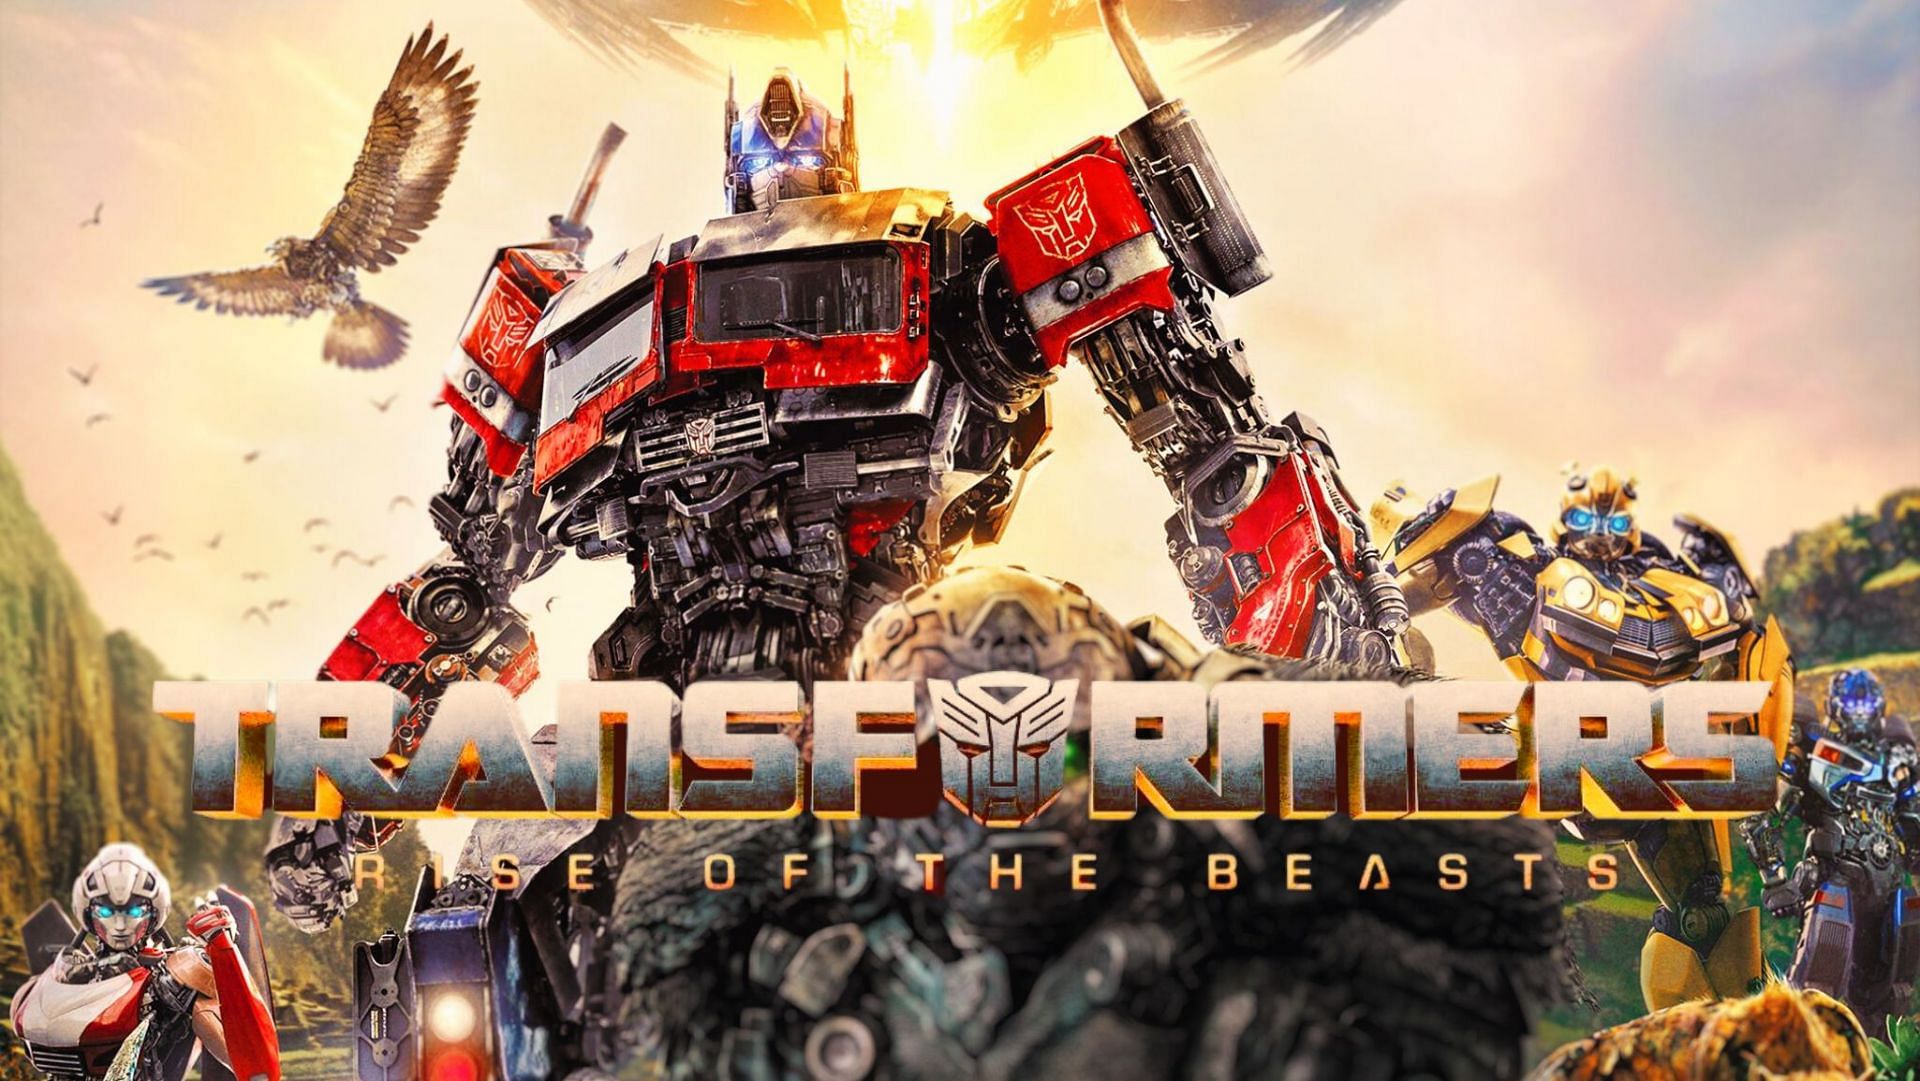 New Transformers movie breaks the franchise record for shortest runtime, bringing a focused story and consistent pacing to the beloved Autobots vs. Decepticons saga (Image via Sportskeeda)